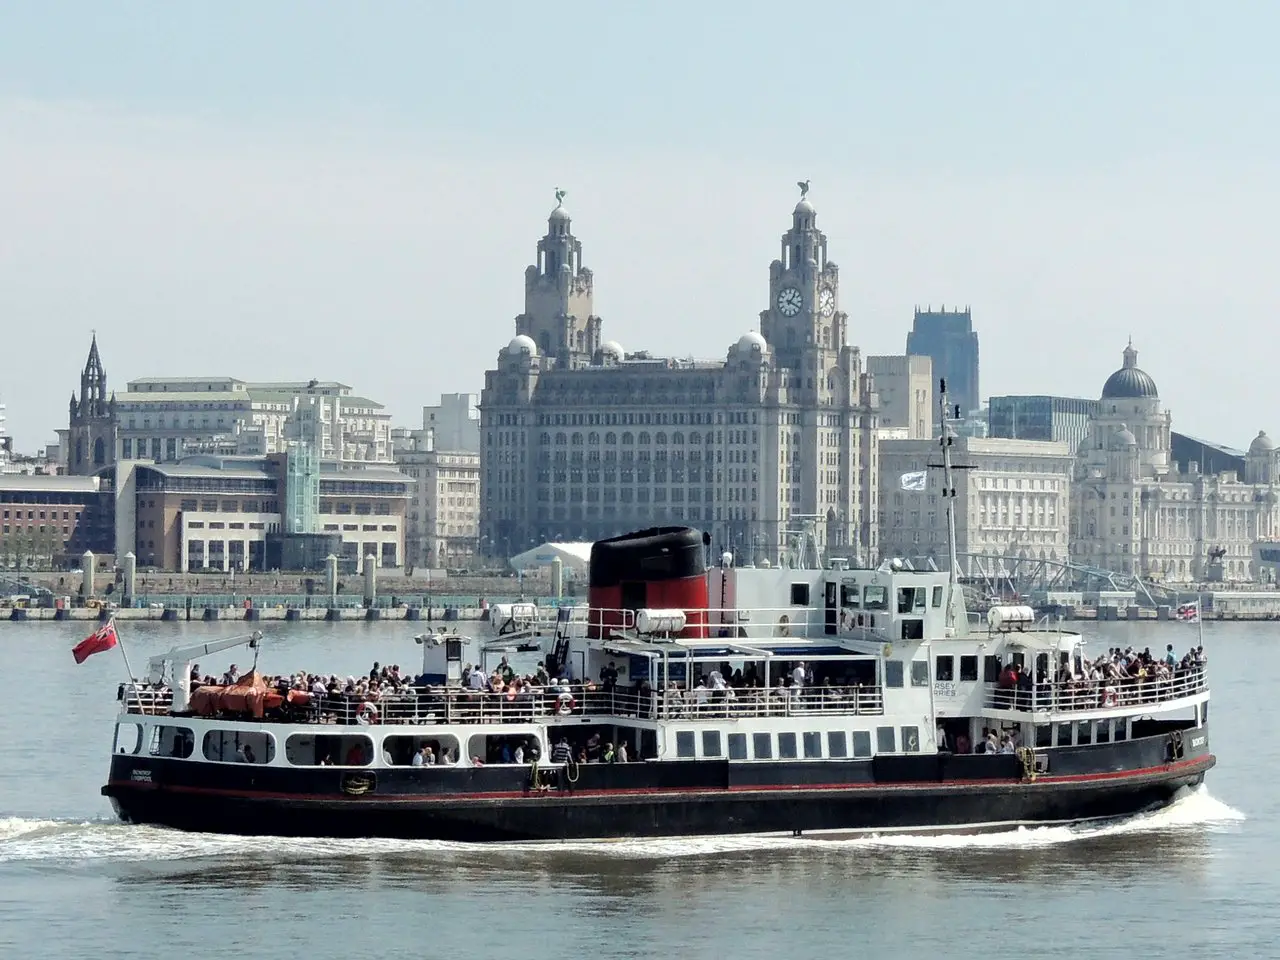 Liverpool afternoon tea cruise on the River Mersey, with the Liver Building in the background